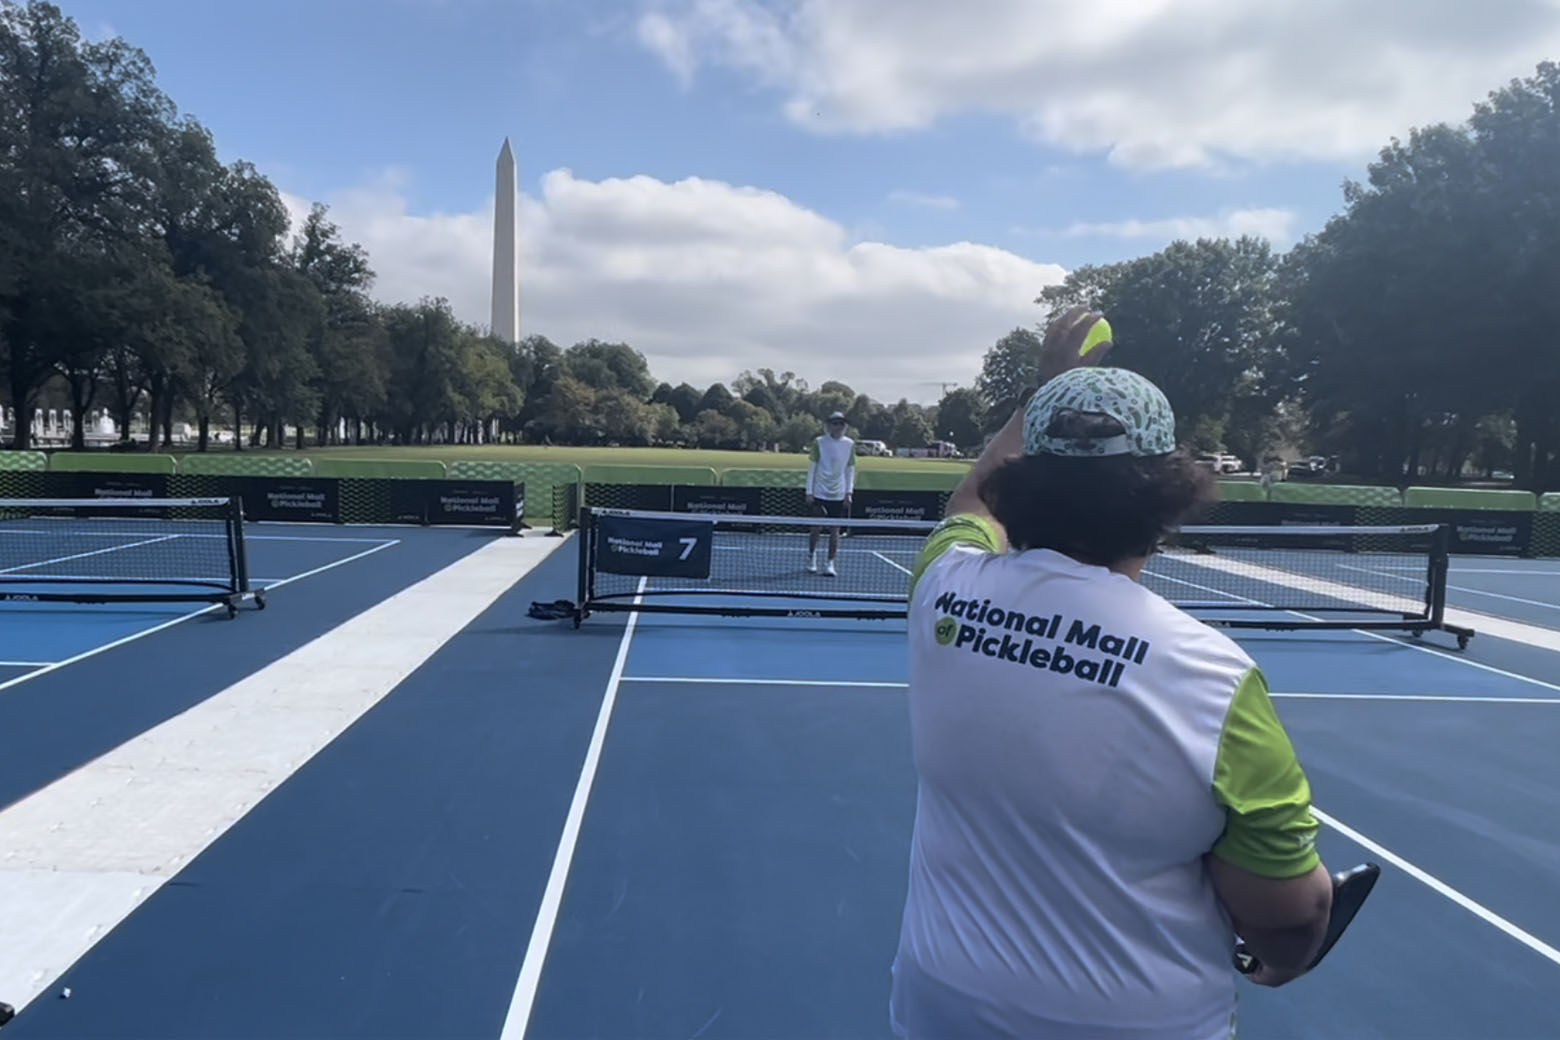 From Sept. 28 through Sept. 30, nine temporary pickleball courts are open along the National Mall (WTOP/Nick Iannelli)